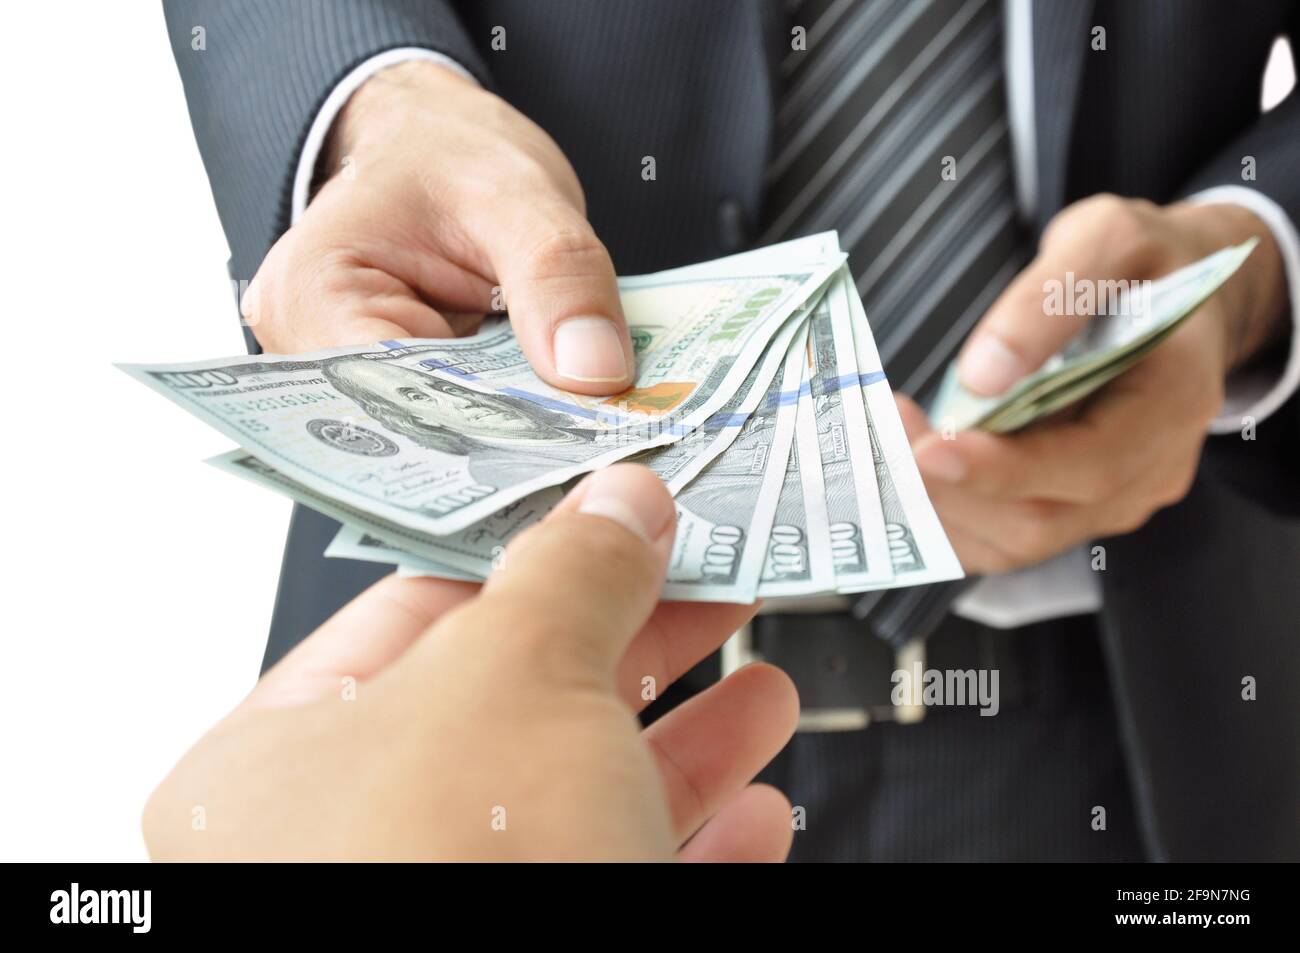 Hand giving money - United States Dollars (or USD) Stock Photo